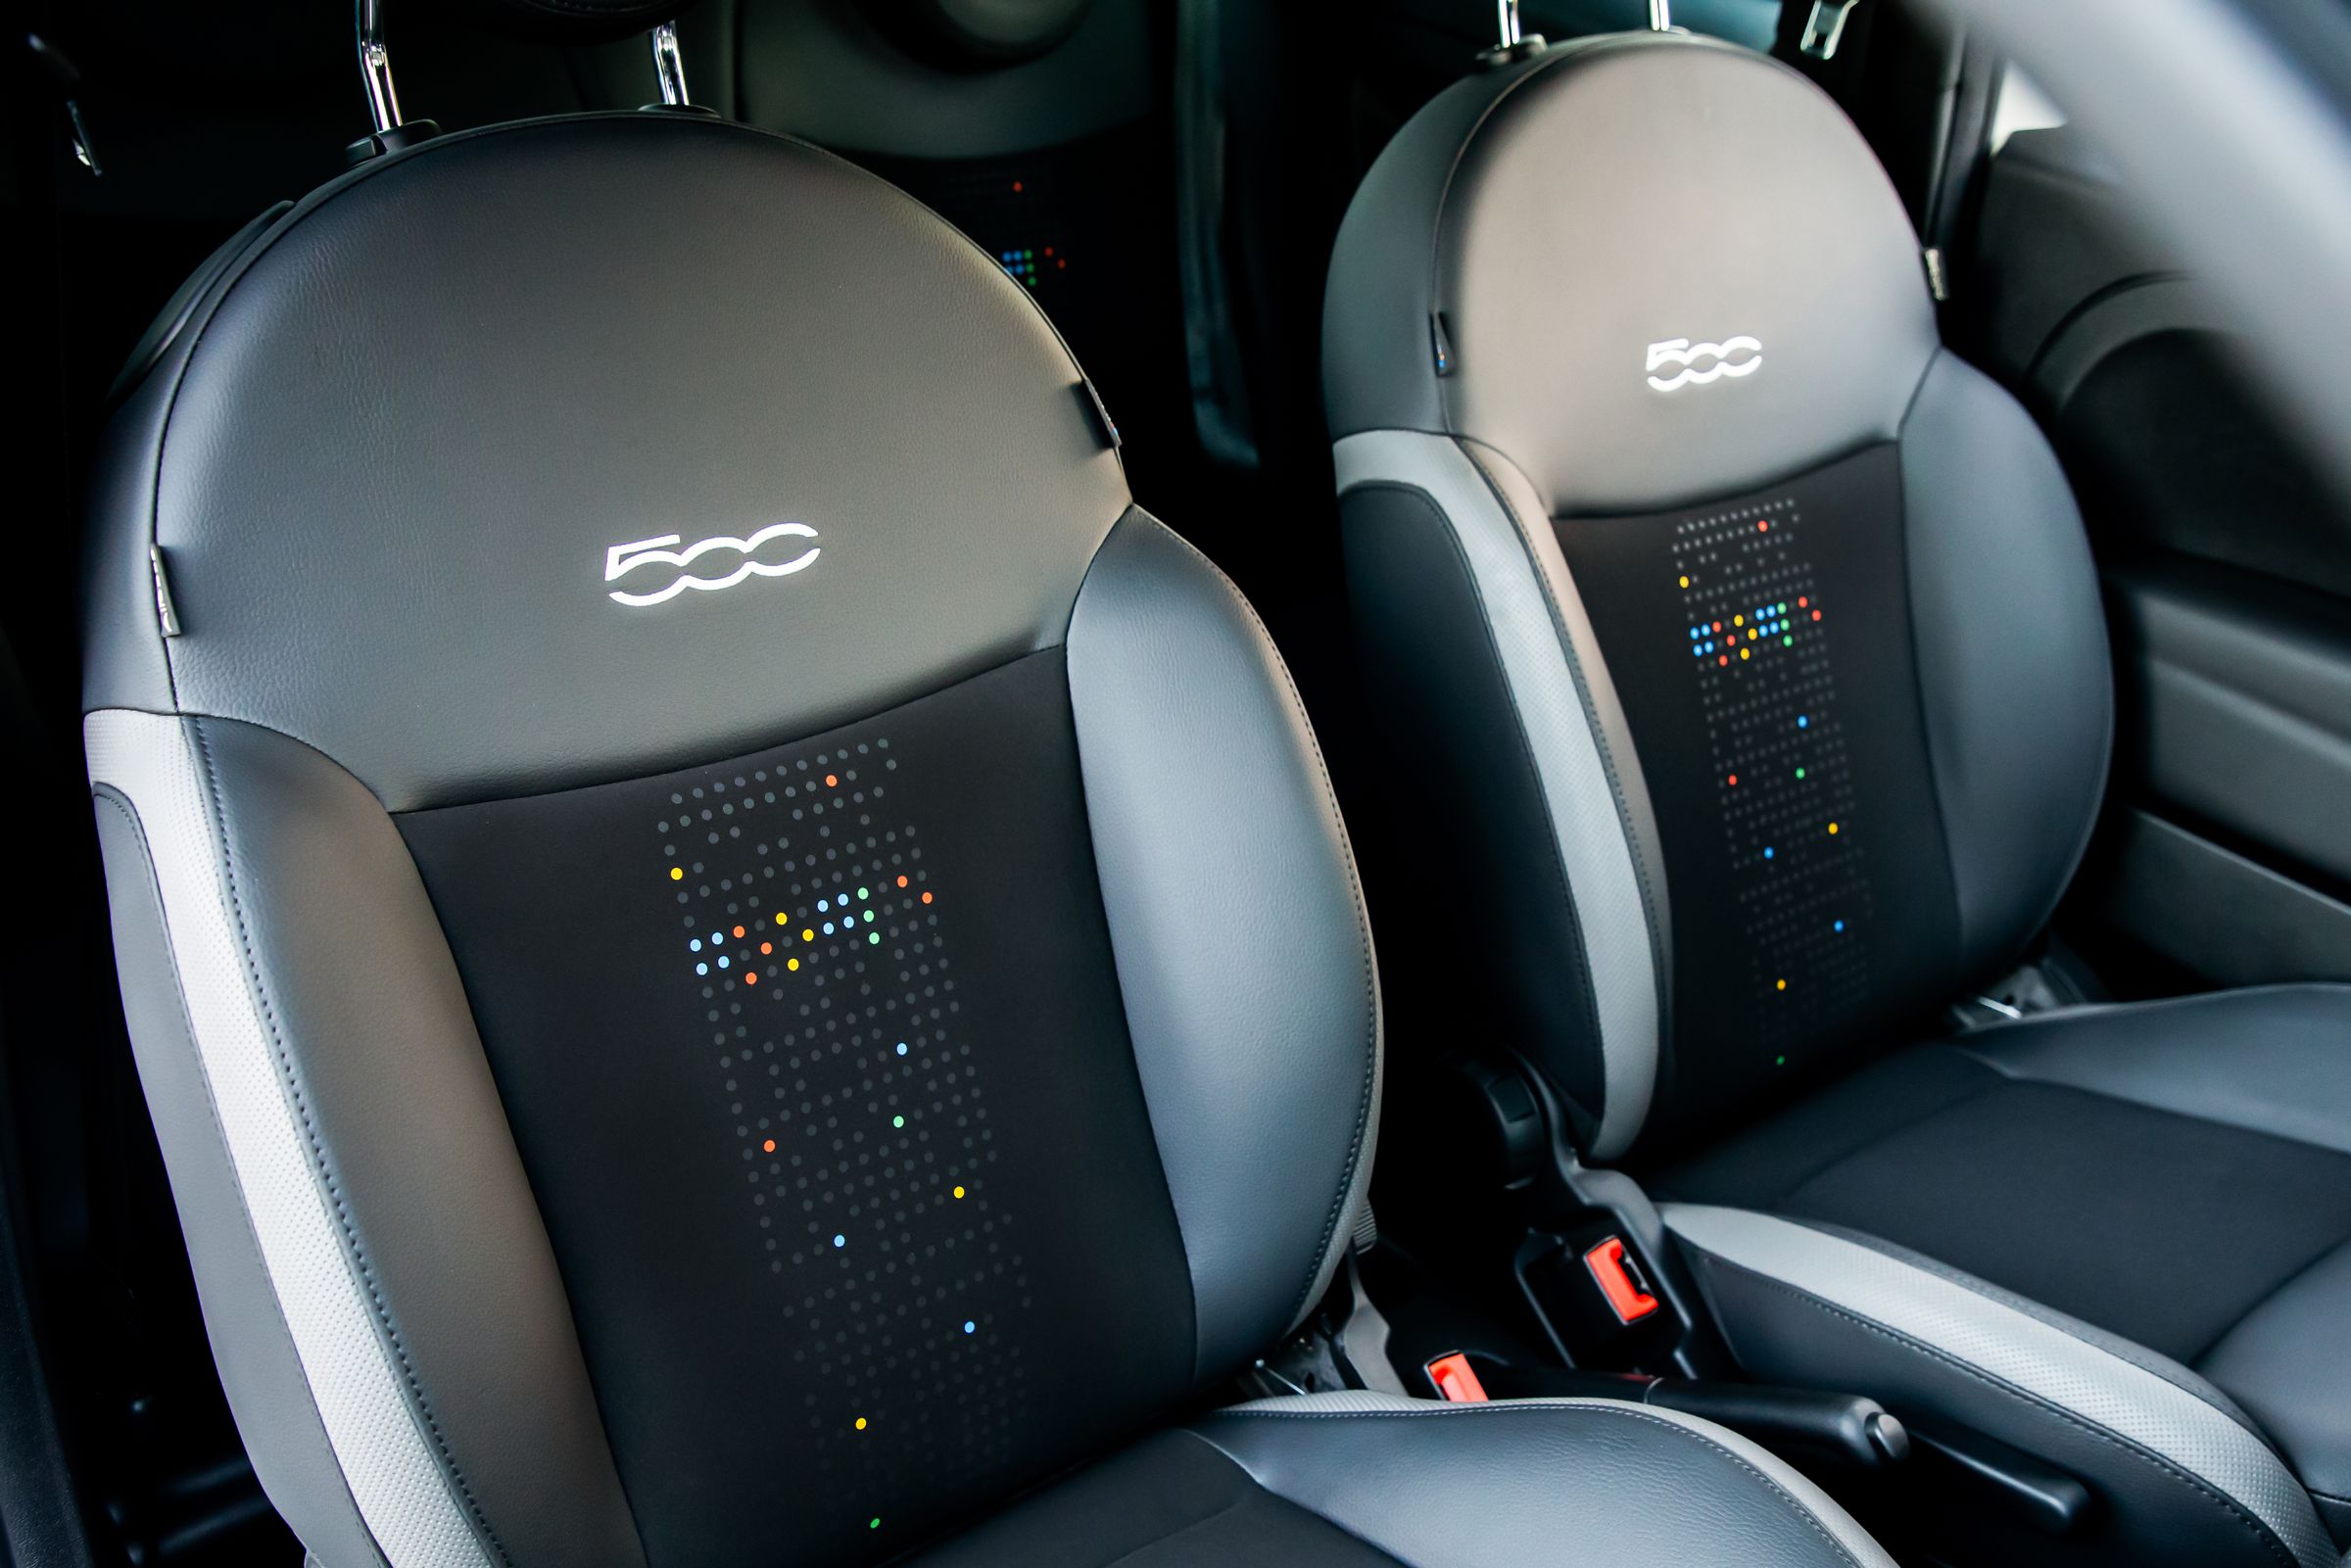 The seats have a special “molecule” design resembling the swirling dots used in Hey Google animations. 